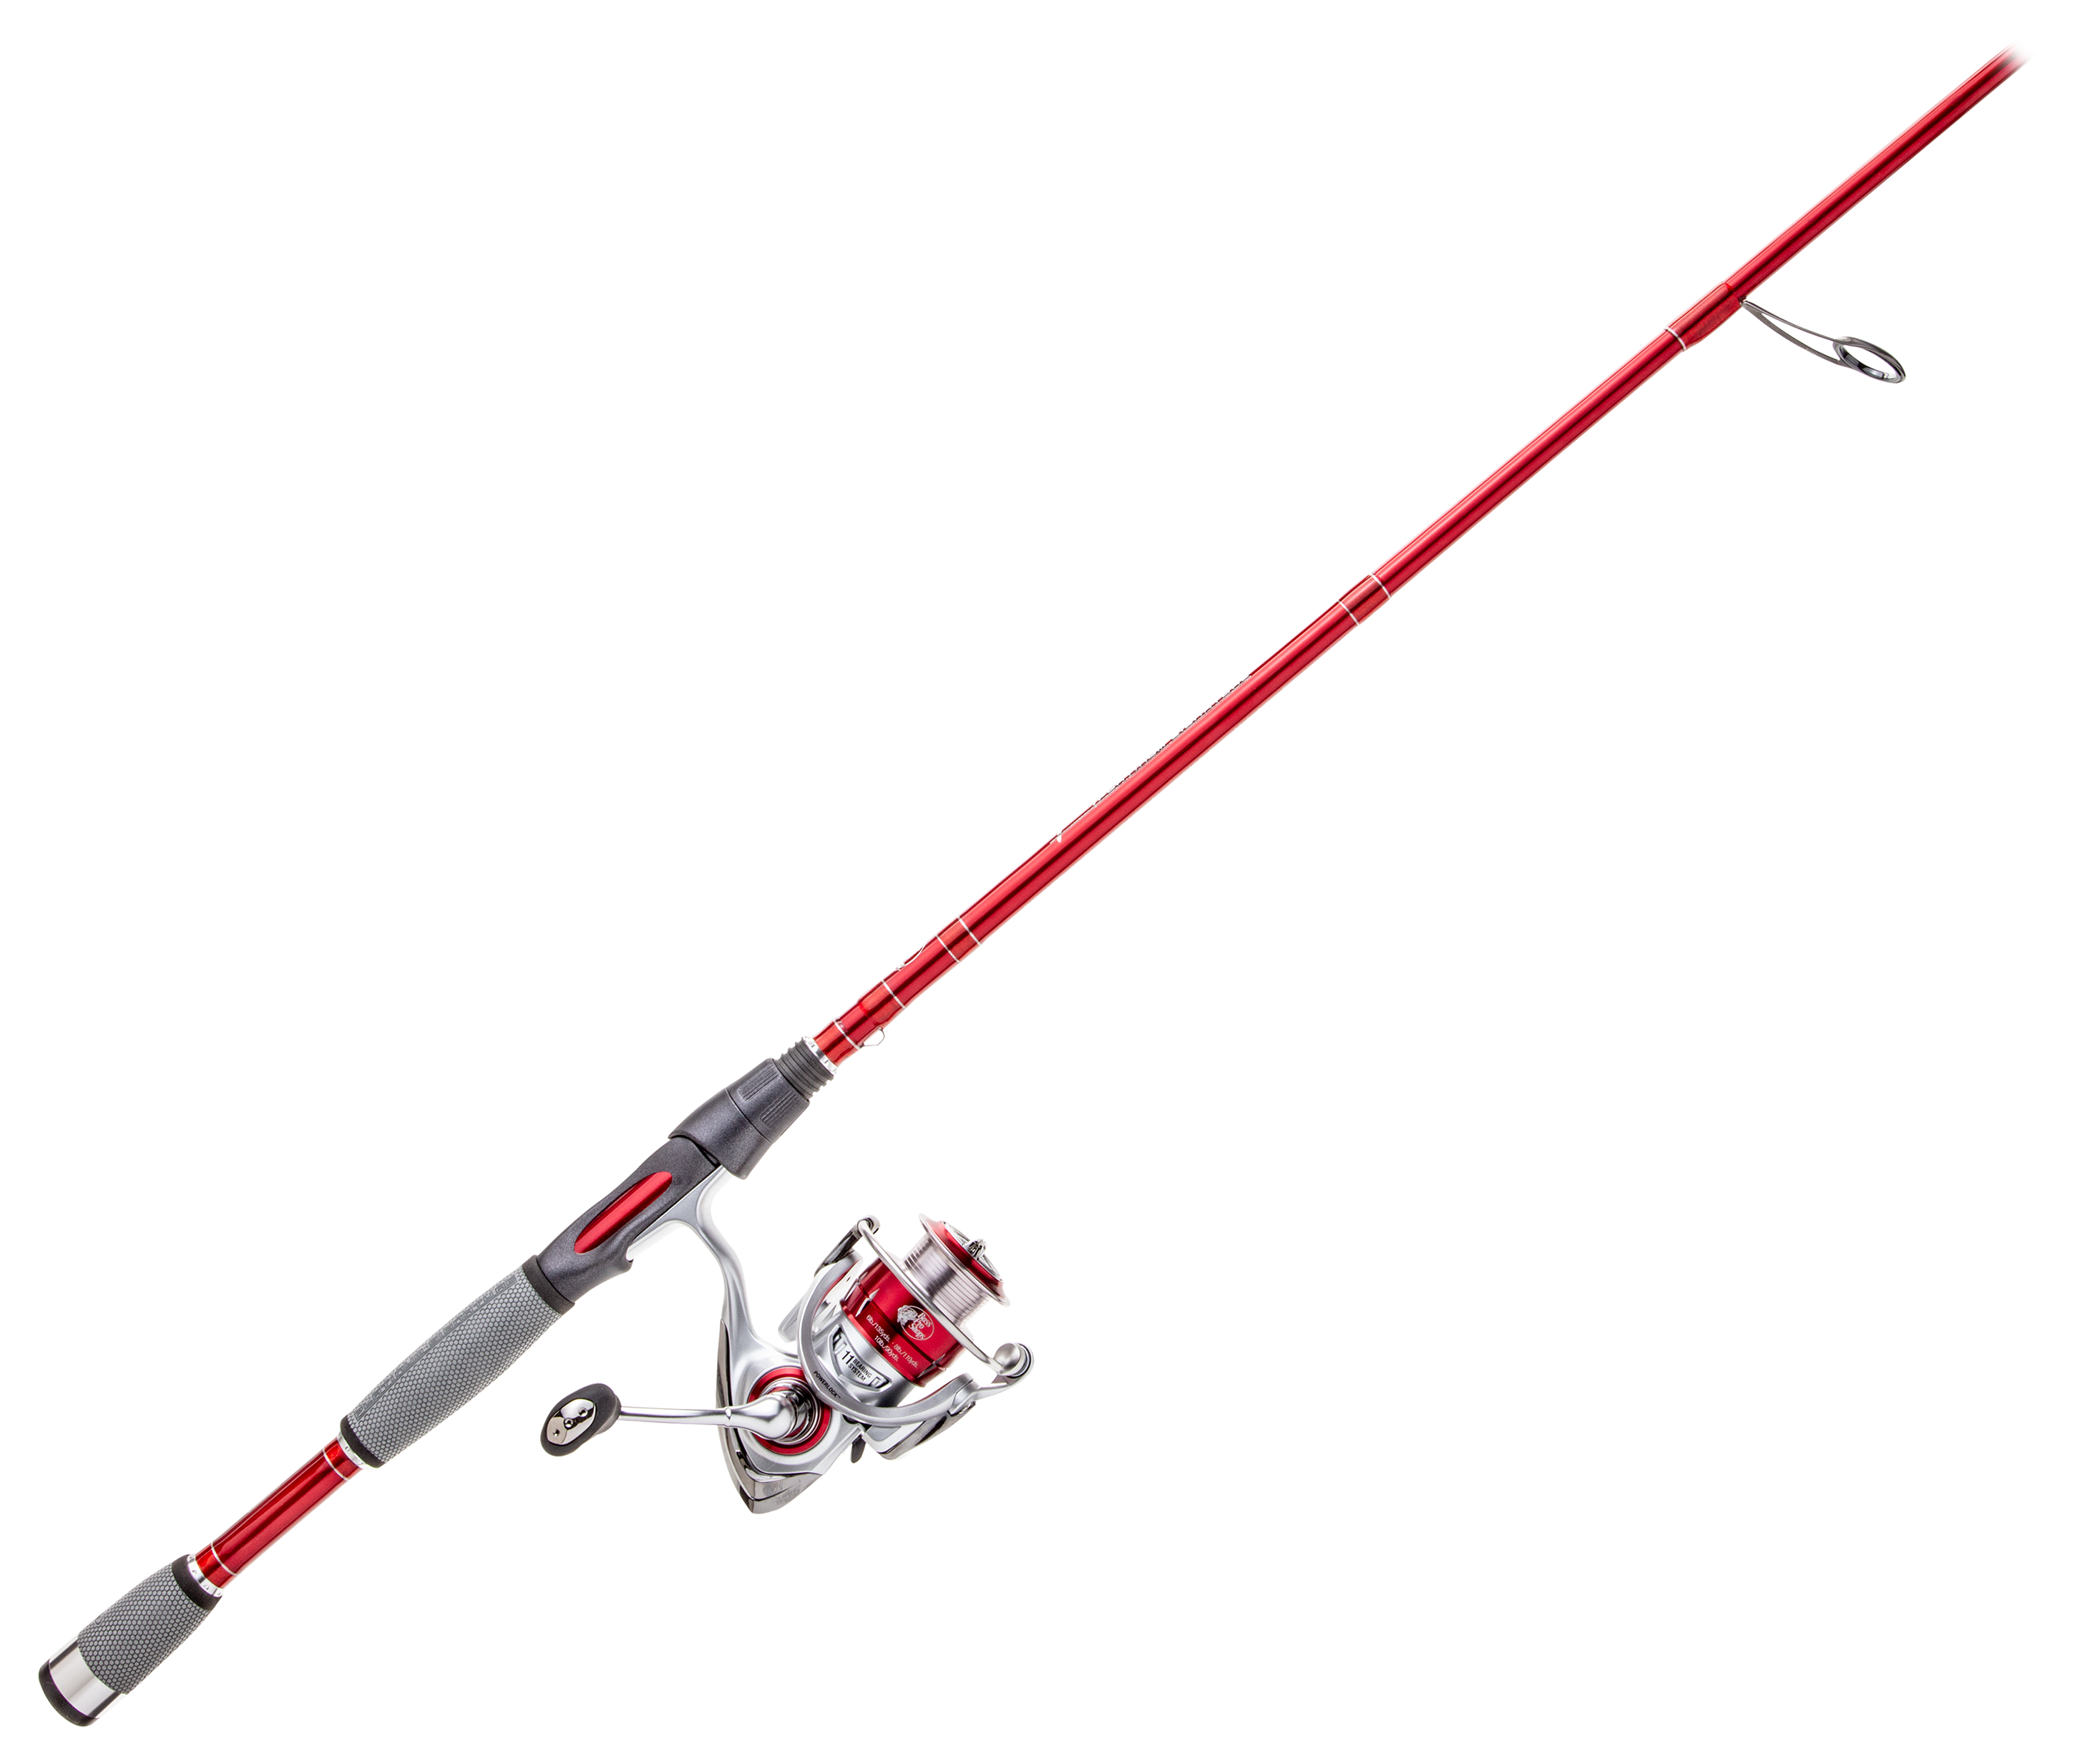 Bass Pro Shops Johnny Morris Platinum Signature Spinning Rod and Reel Combo - 3000 - 6 9  - Med Heavy - 6 0 1